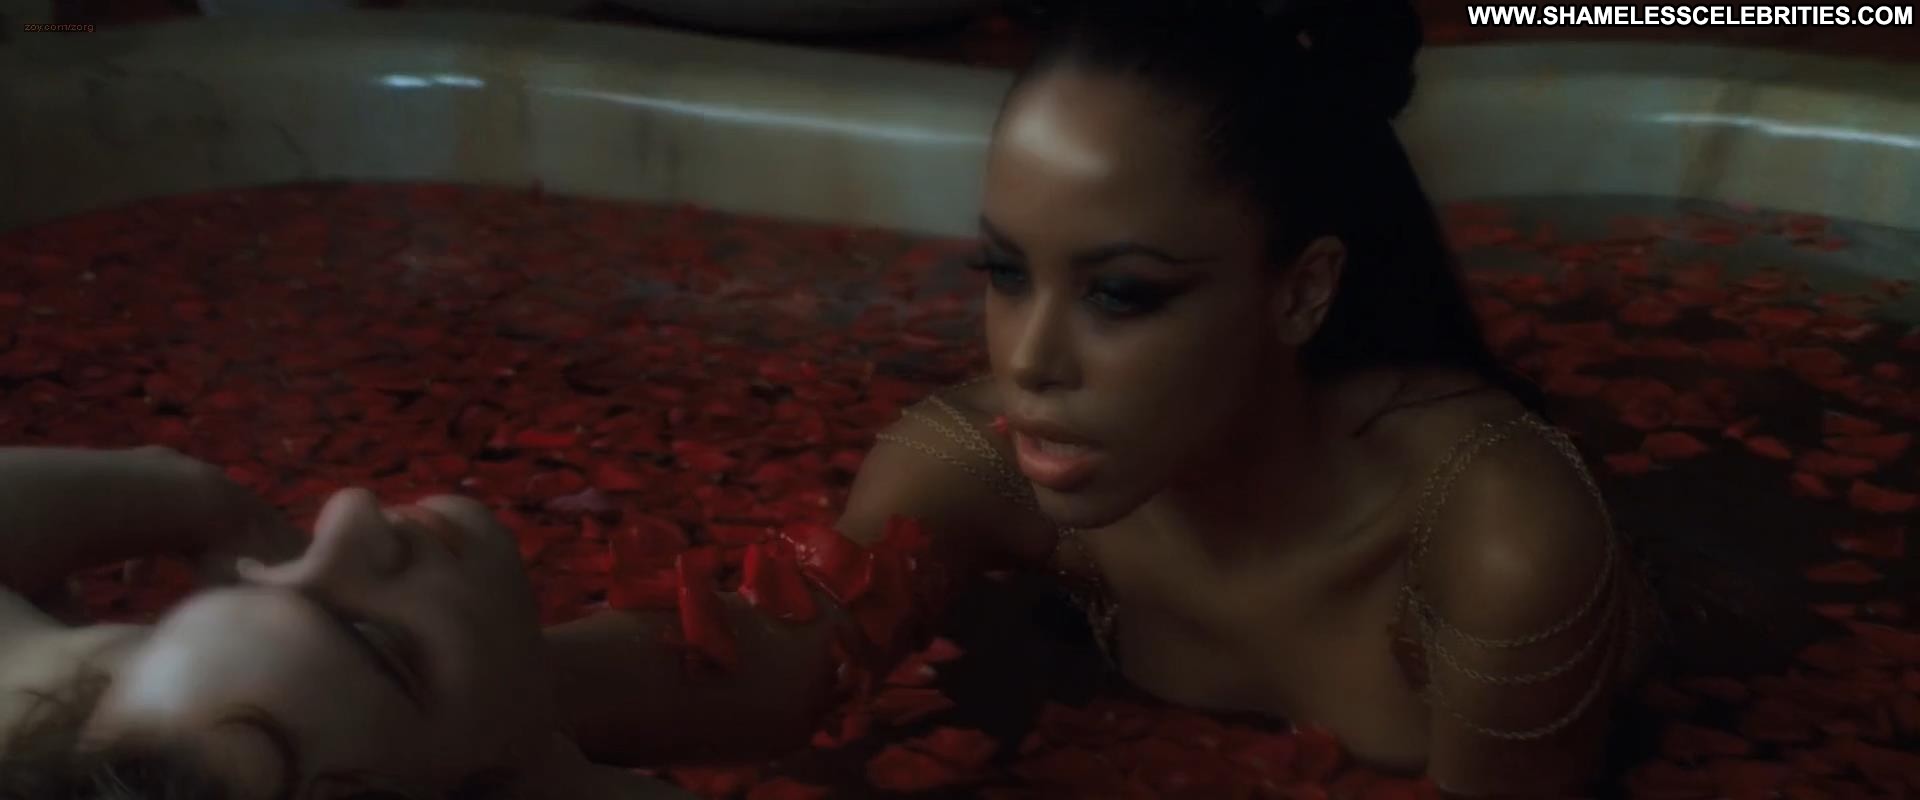 Queen Of The Damned Aaliyah Sexy Celebrity Hot Posing Hot. 